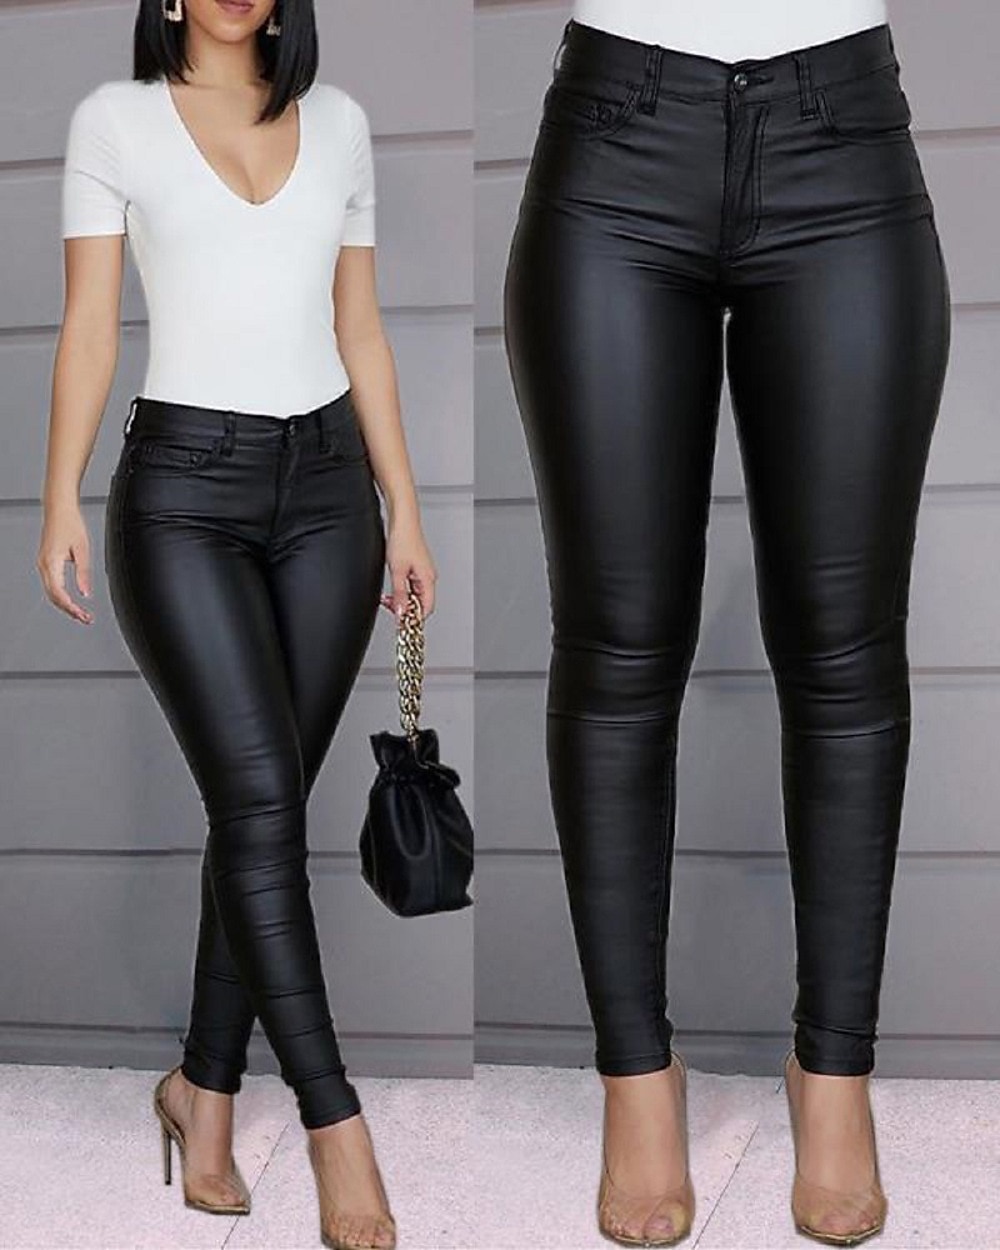 Womens Faux Leather Leggings High Waist Patent Leather Pants Party